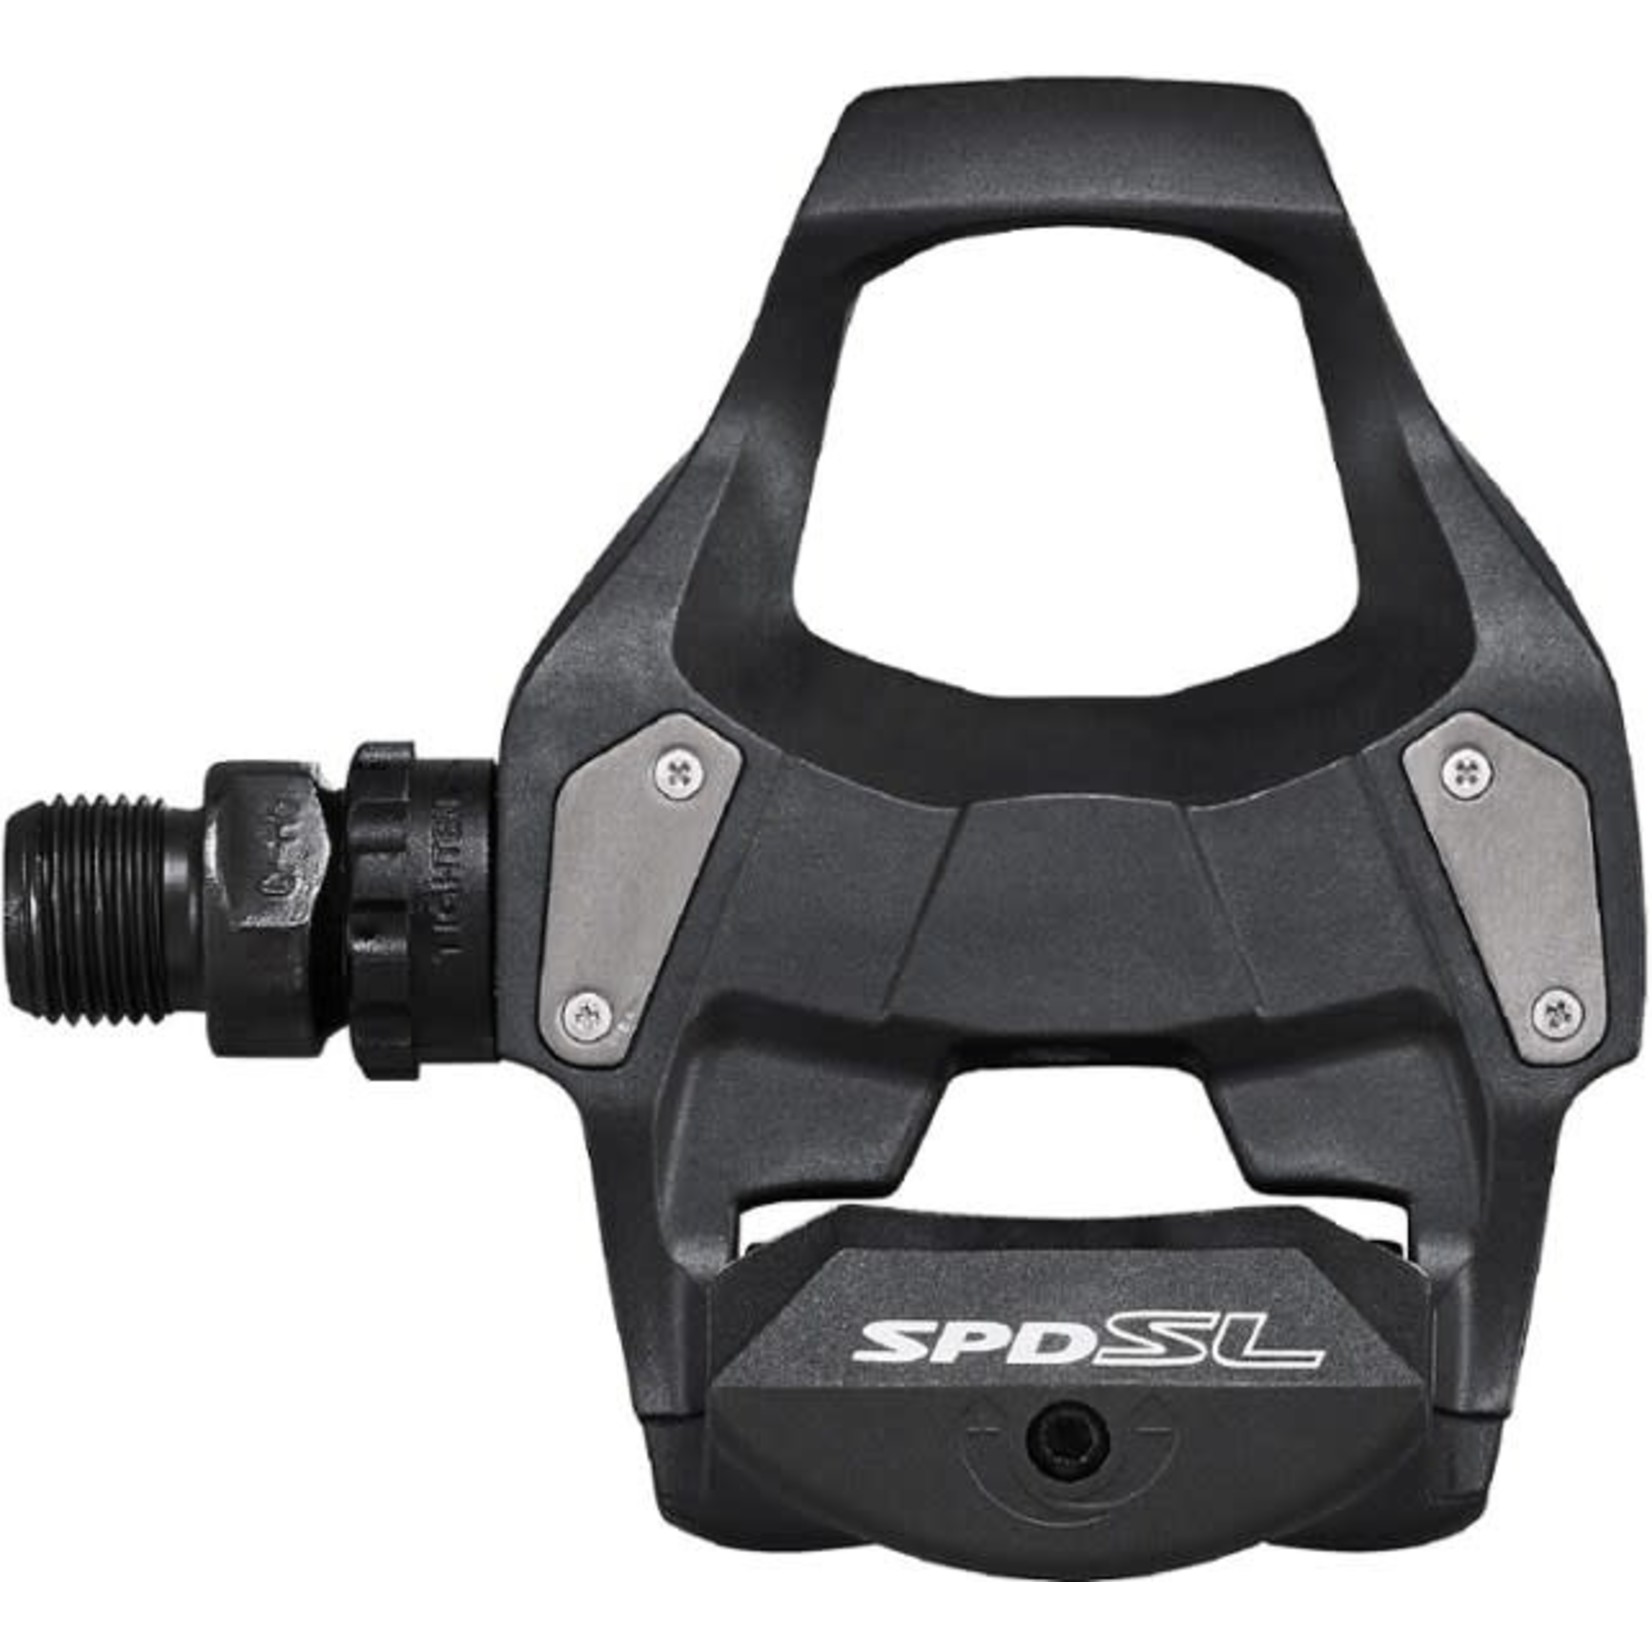 Shimano PD-R550, SPD-SL Pedal with Cleat SM-SH11, Black